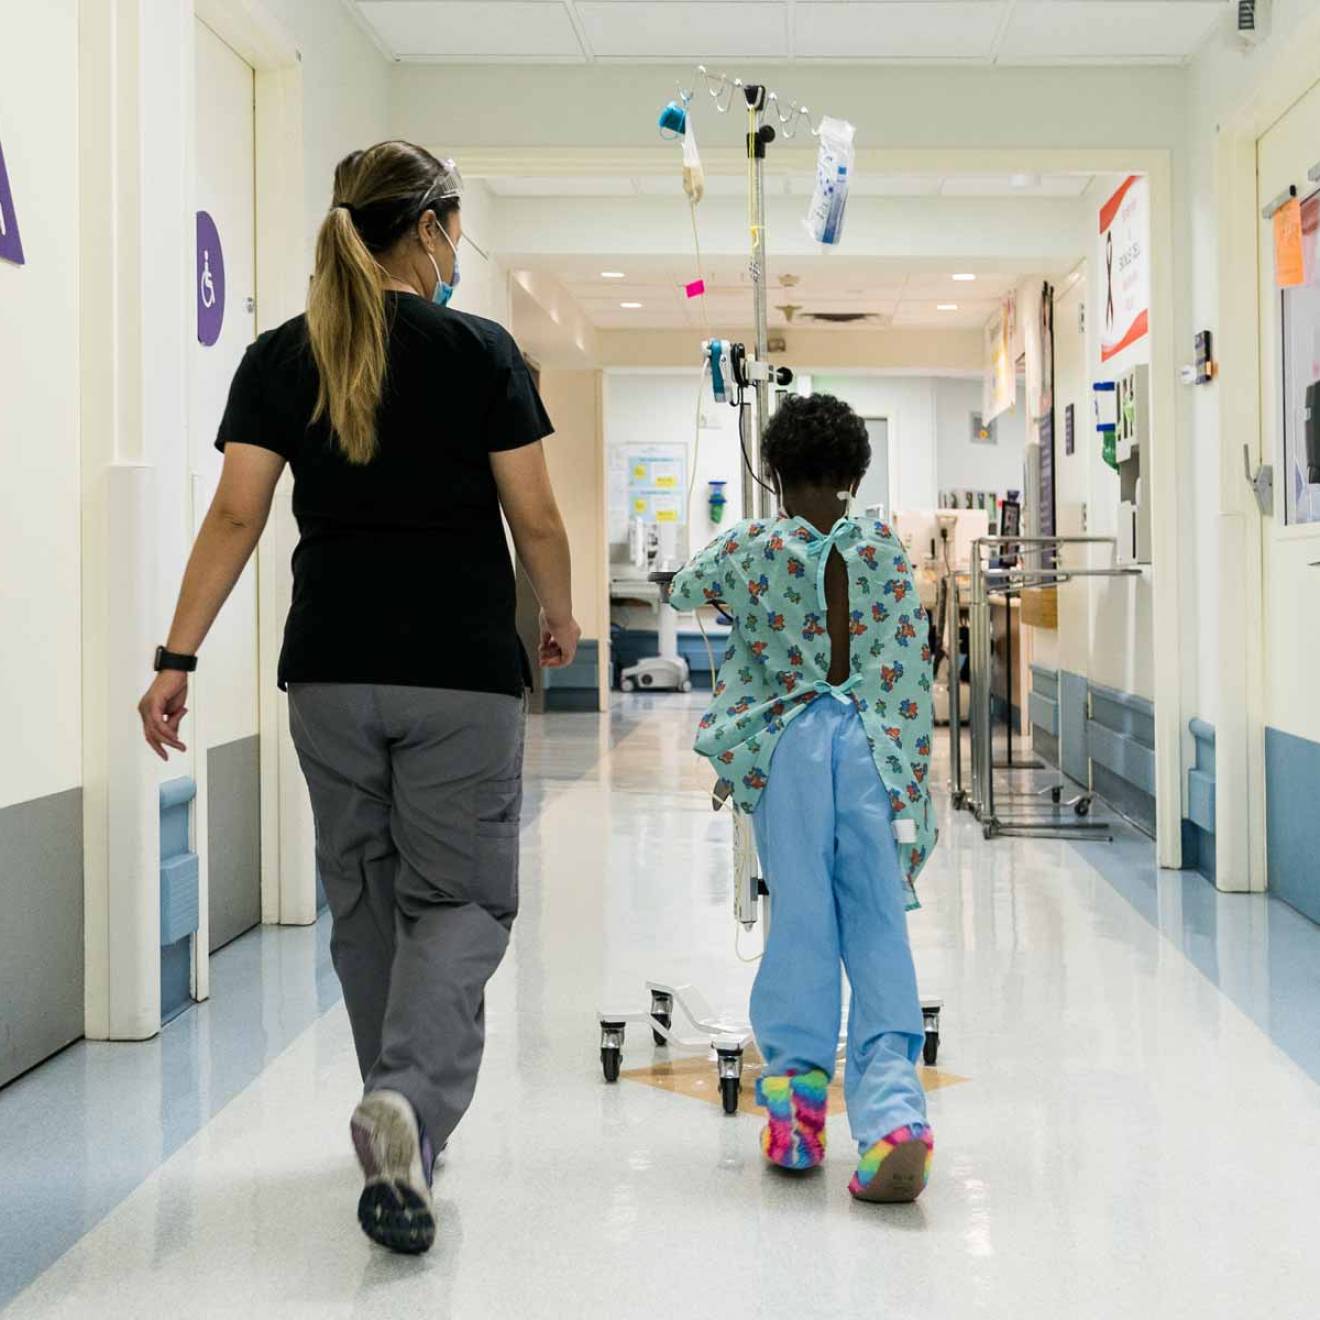 a nurse wearing a mask walks with a young Black patient around a hospital unit